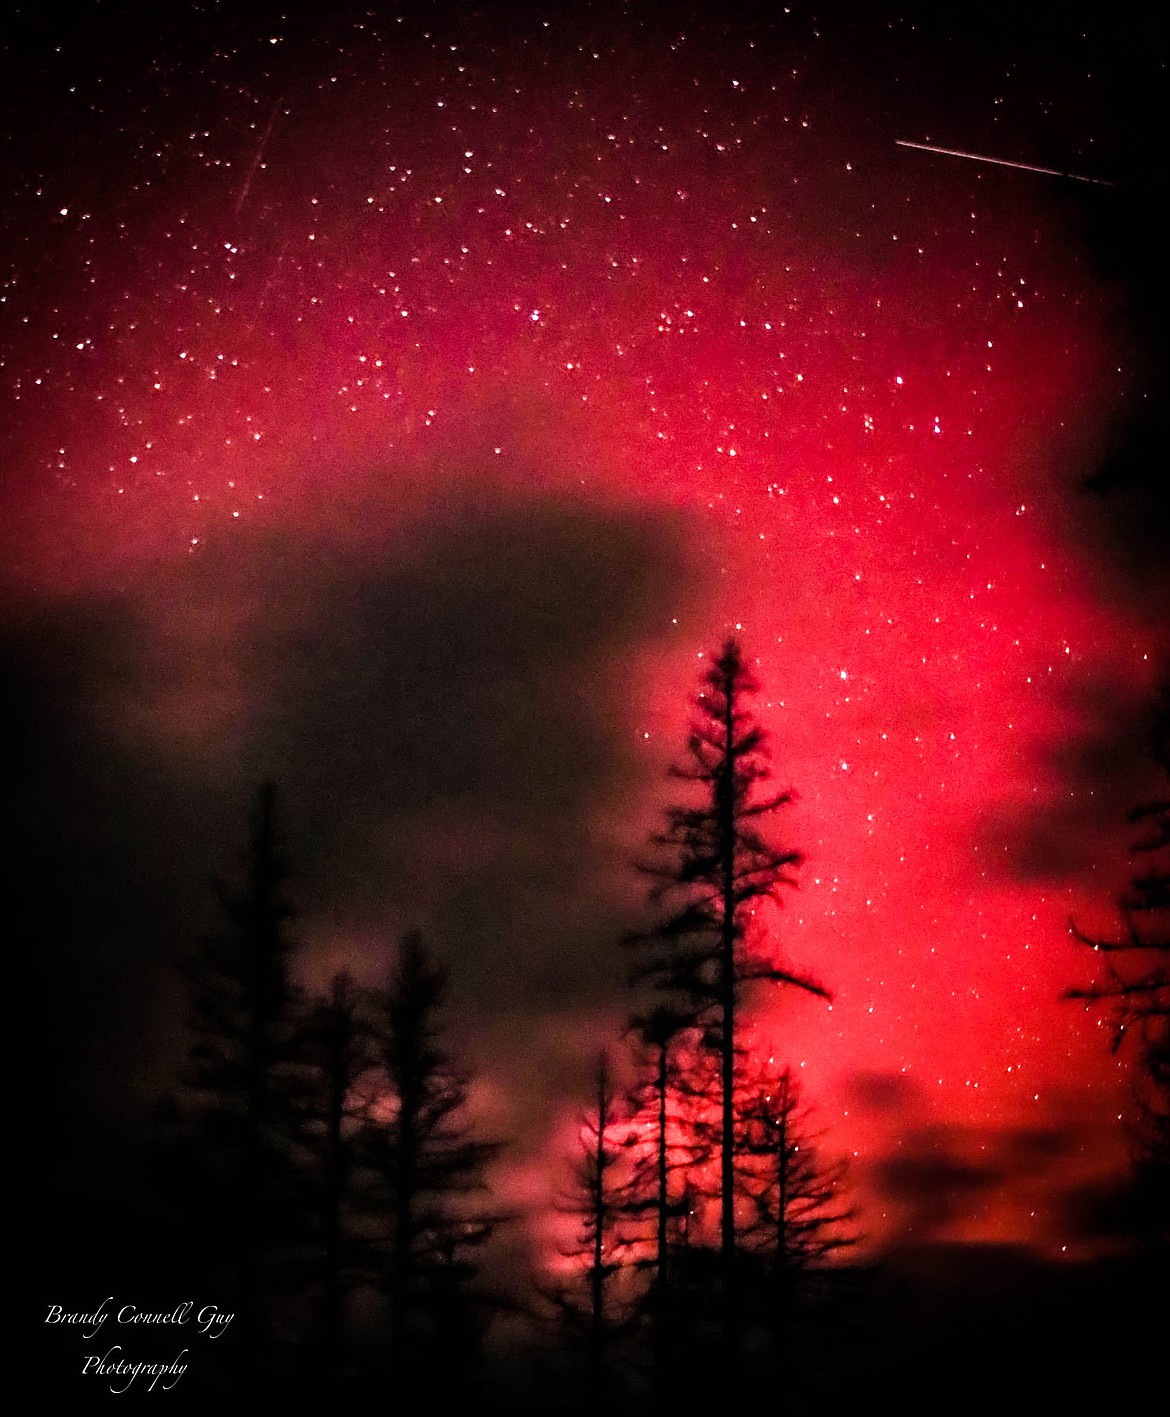 Guy said she saw the glow of the aurora and took out her camera. To the naked eye, the northern lights can sometimes be hard to see in Northwest Montana. But photos help bring out the deep pinks, reds and greens that color the sky. (photo provided)